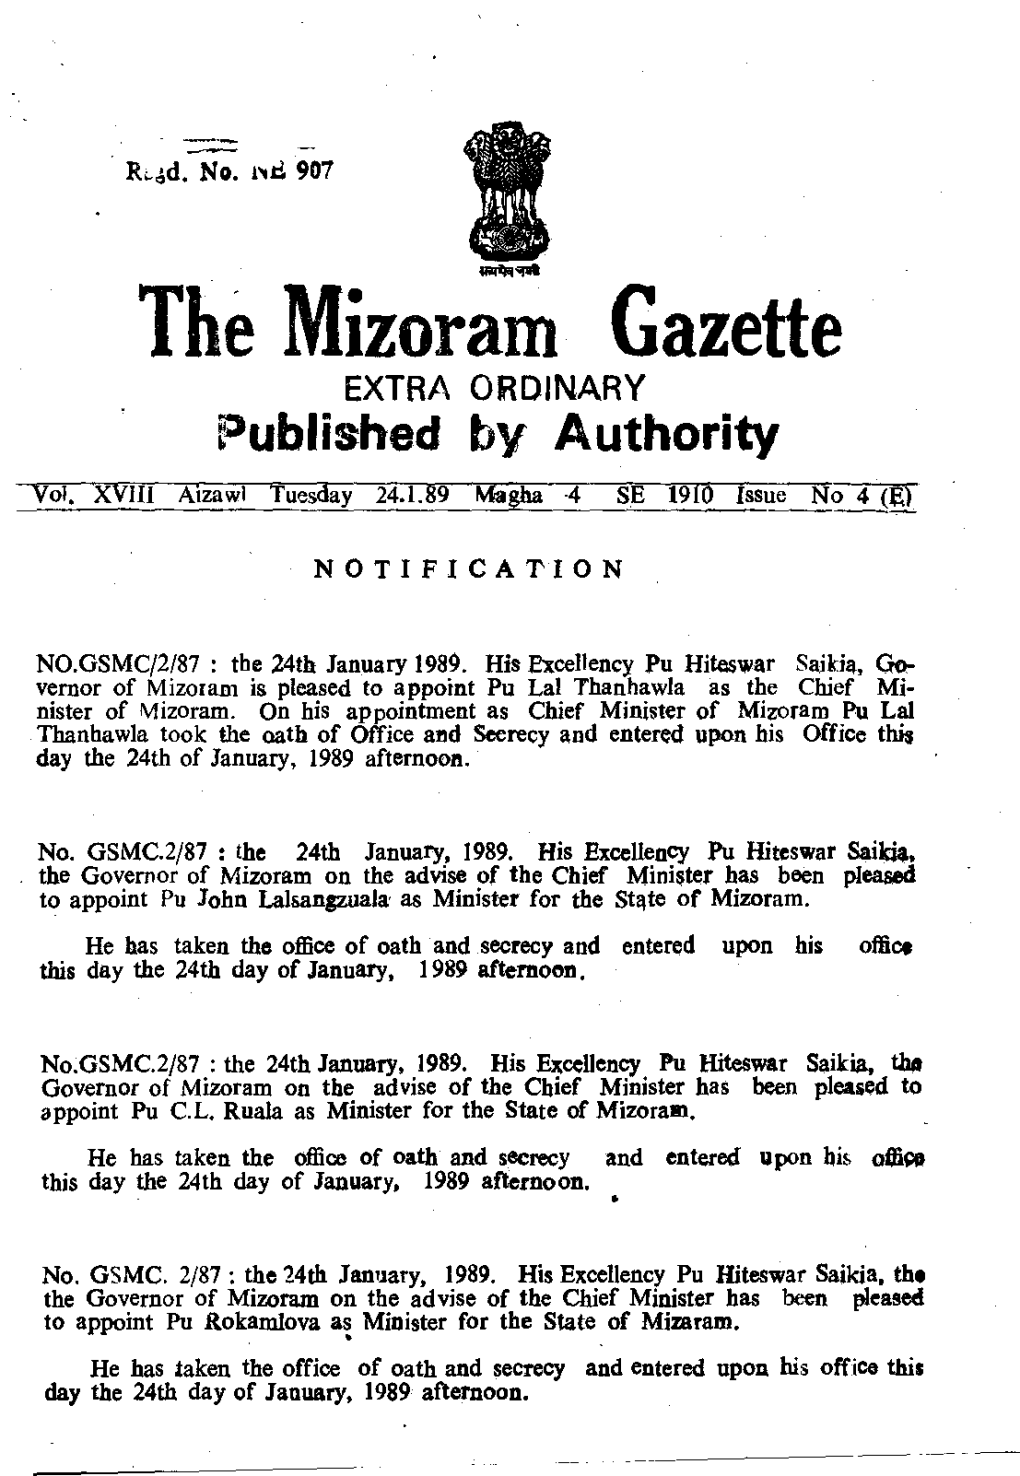 The Mizoram Gazette EXTRA ORDINARY Published by Authority Vol